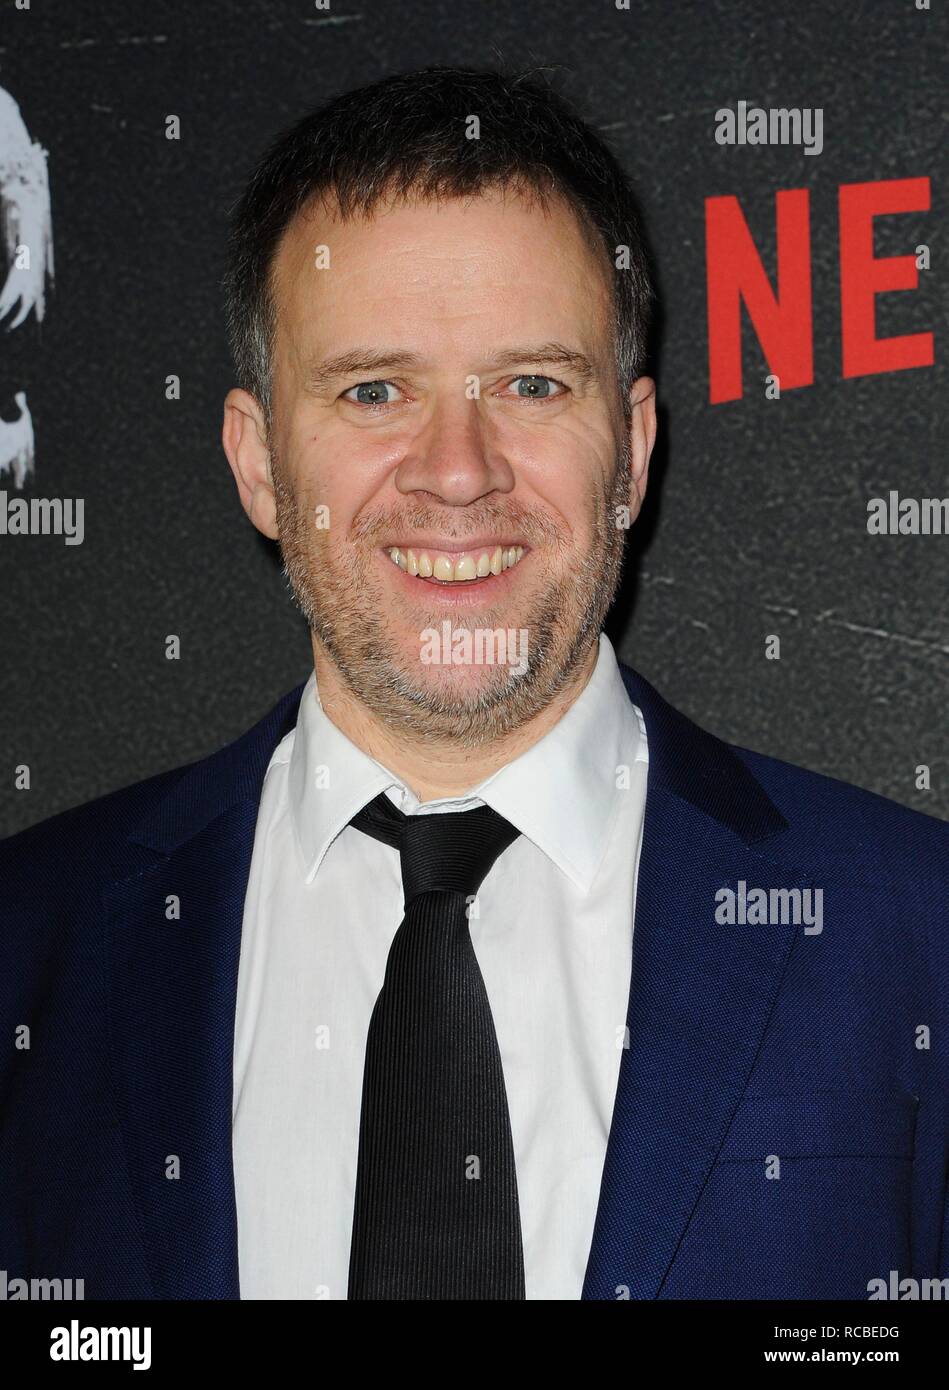 Los Angeles, CA, USA. 14th Jan, 2019. Jim O'Hanlon at arrivals for MARVEL's THE PUNISHER Premiere on NETFLIX, ArcLight Hollywood, Los Angeles, CA January 14, 2019. Credit: Elizabeth Goodenough/Everett Collection/Alamy Live News Stock Photo